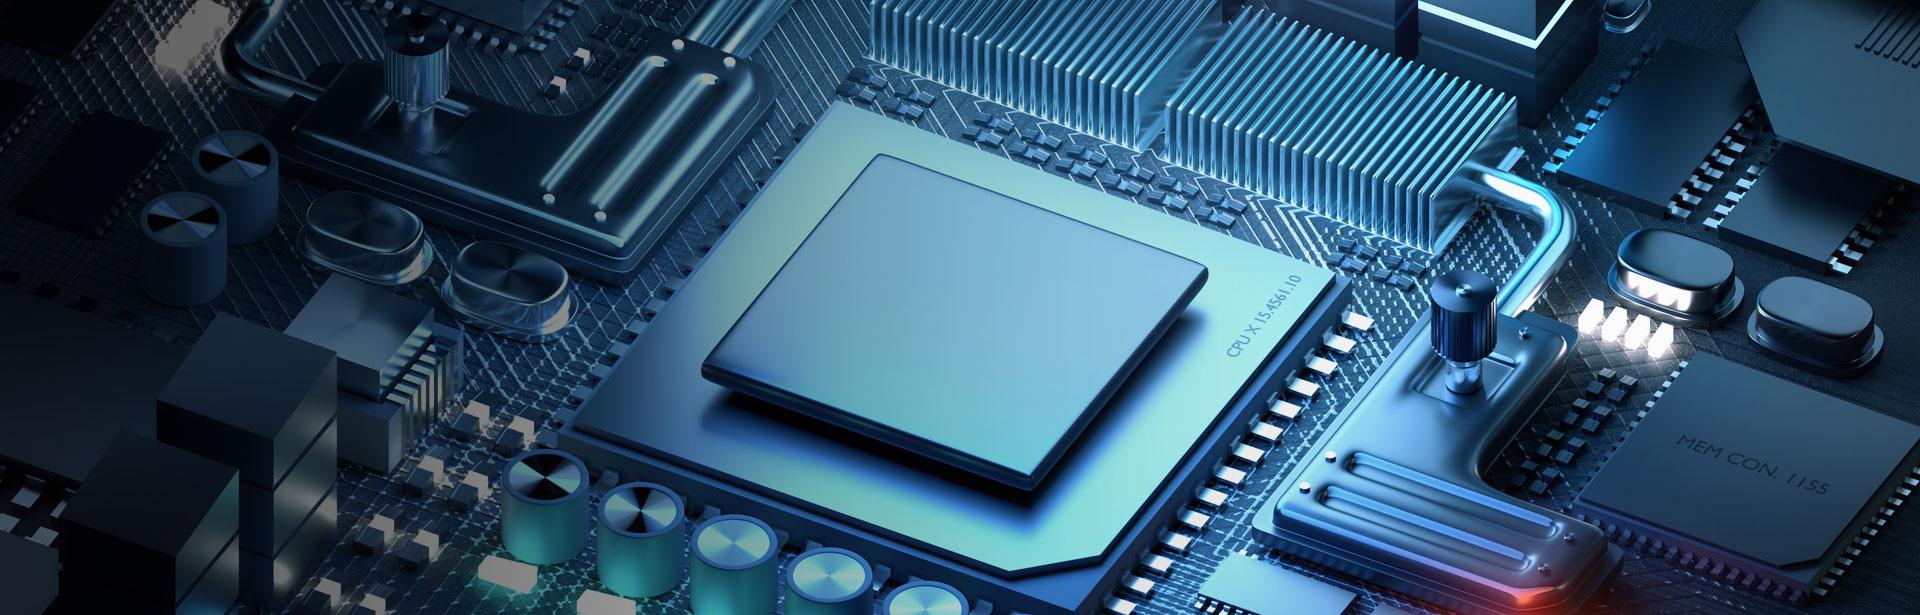 A silicon CPU and microprocessor technology for modern day applications. 3D render illustration.